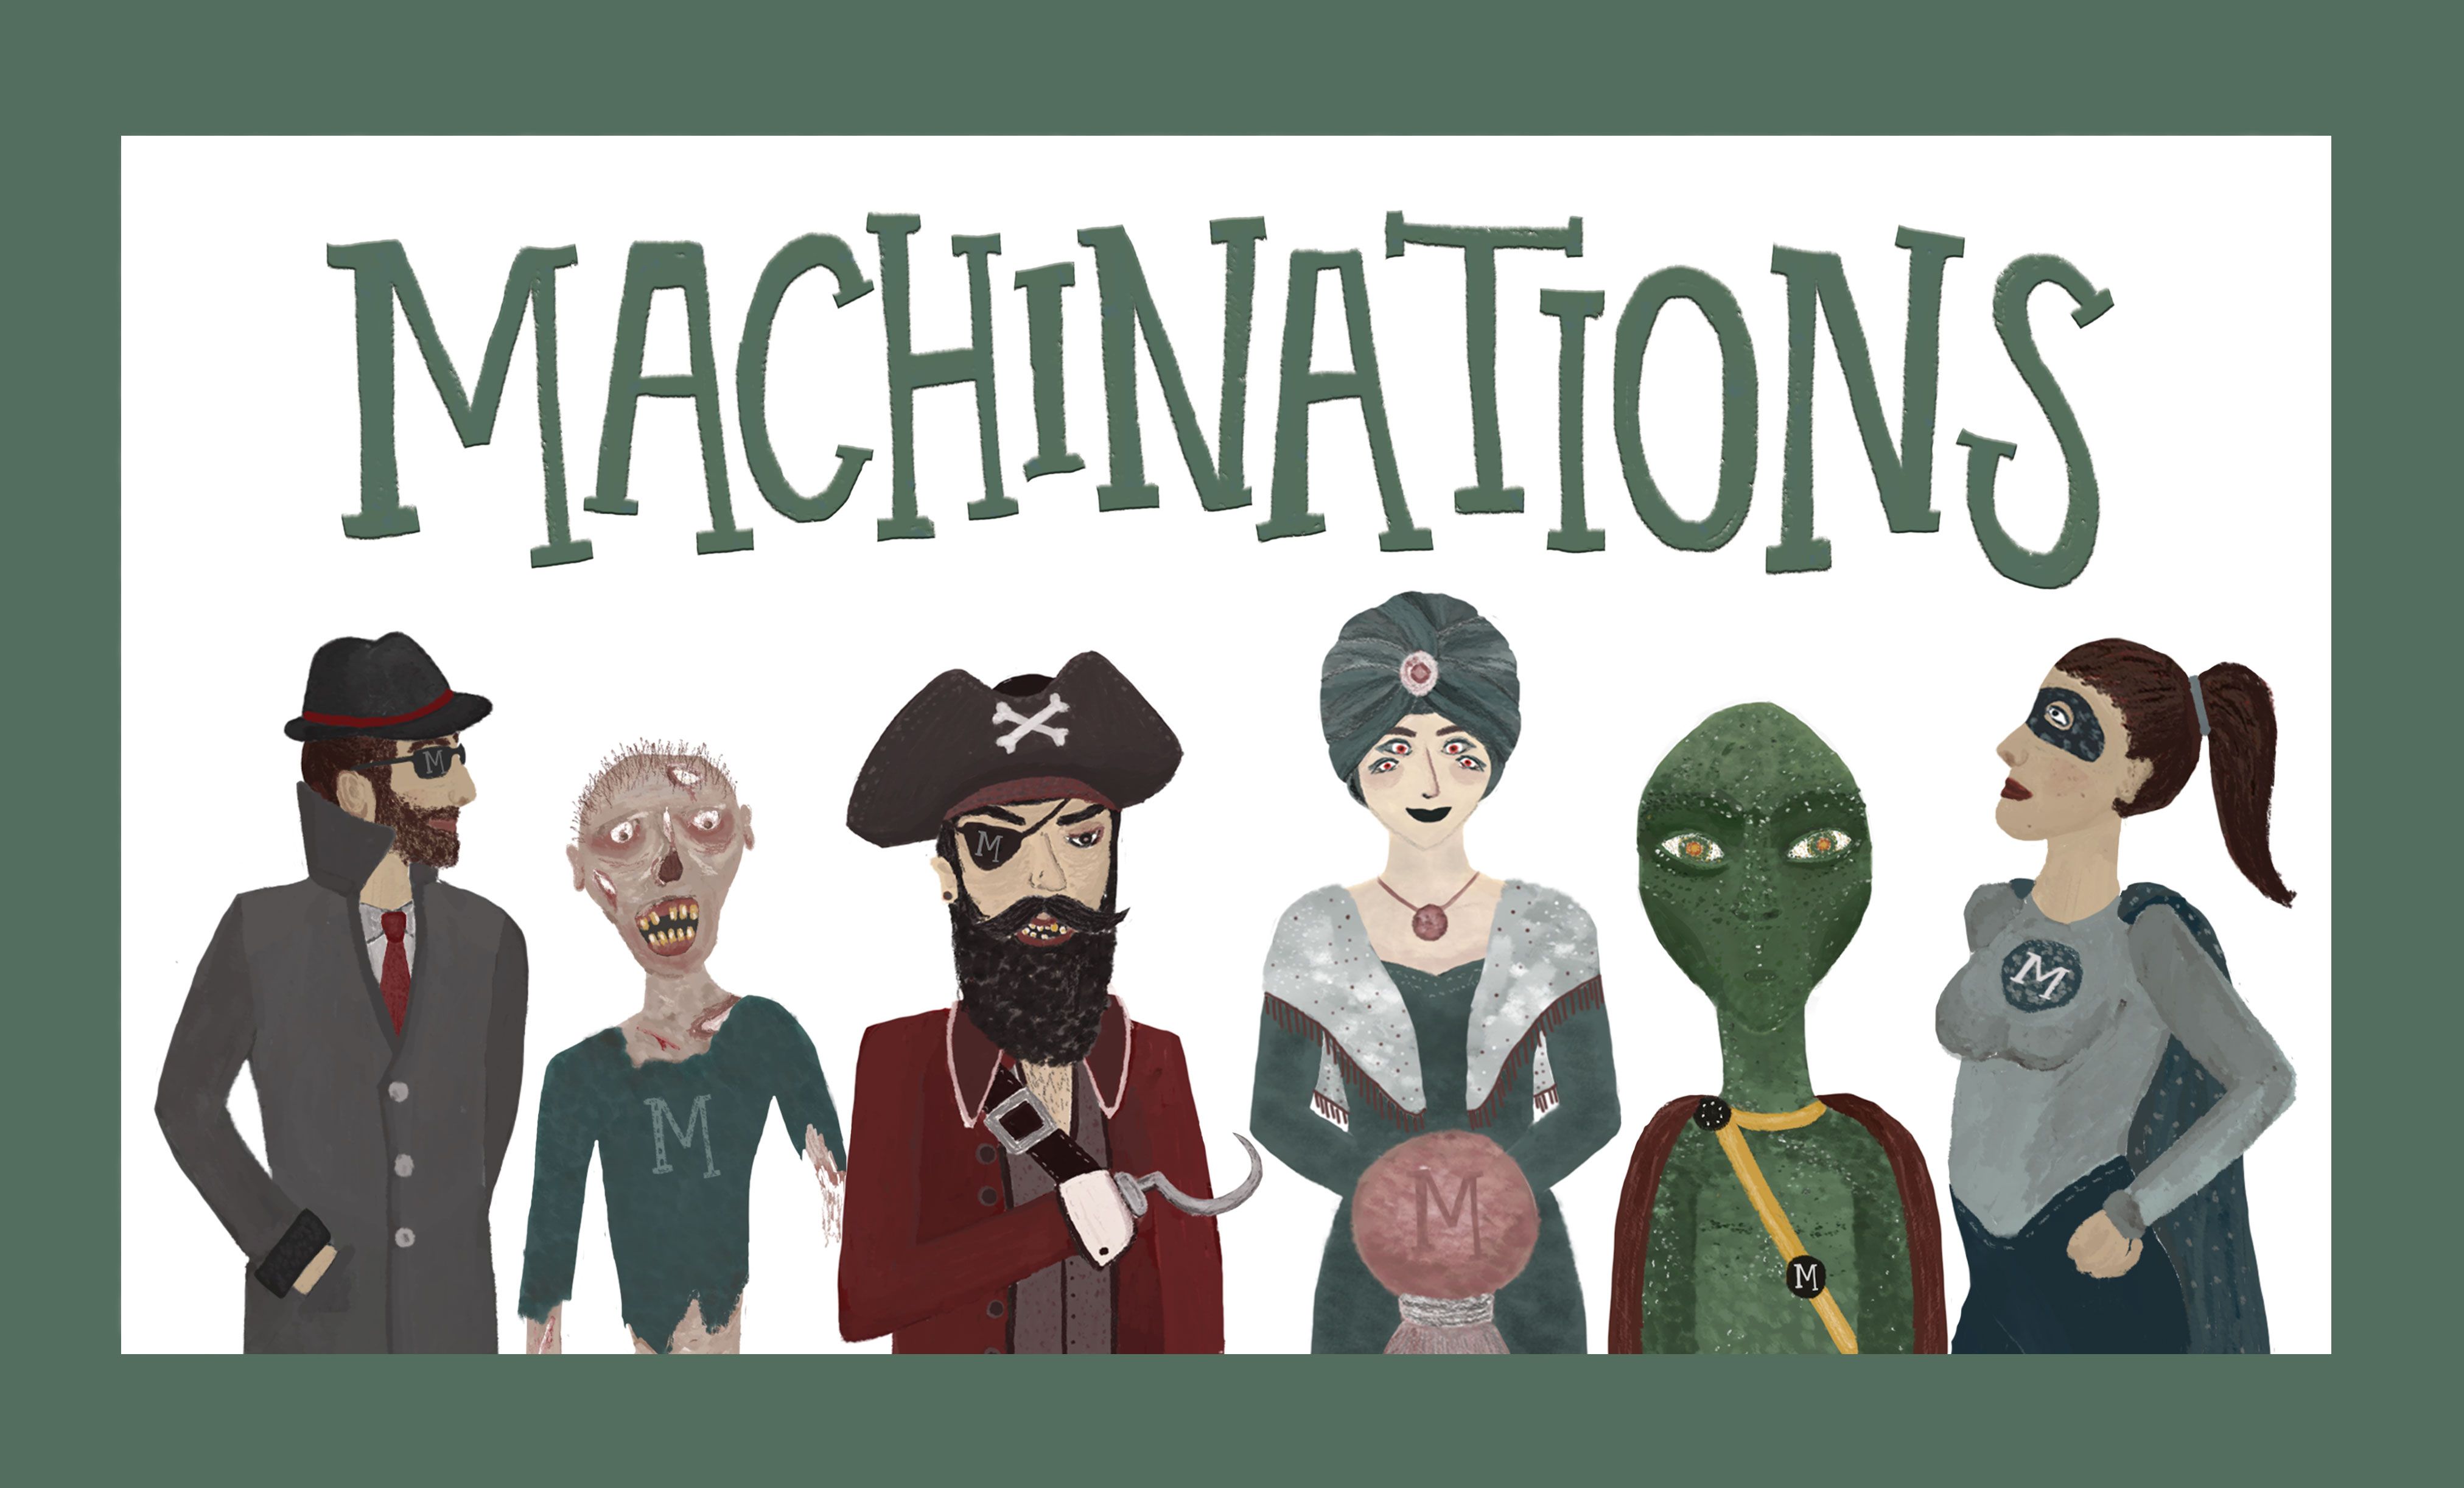 Machinations: A Game of Devious Schemes